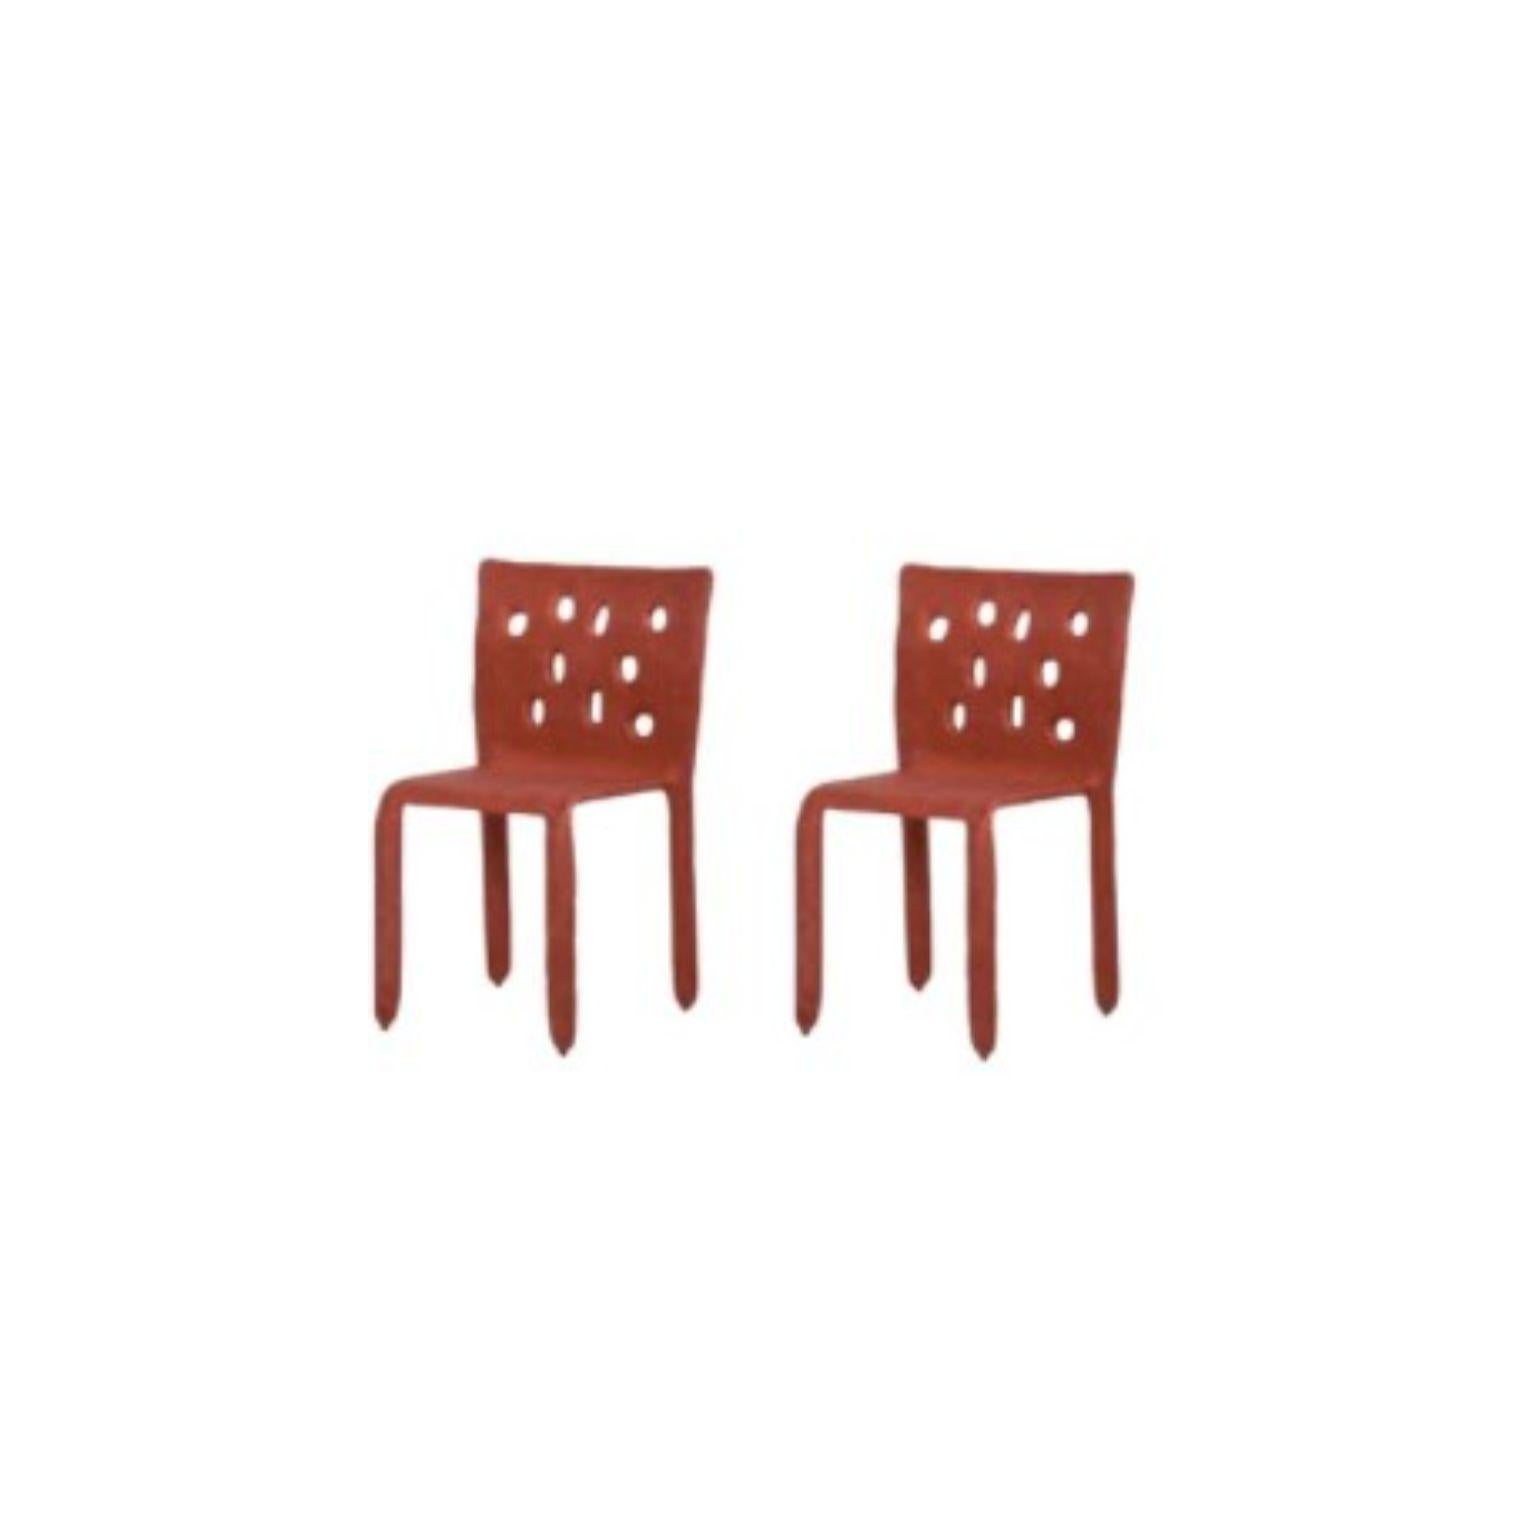 Set of 2 Red Sculpted Contemporary Chairs by FAINA
Design: Victoriya Yakusha
Material: steel, flax rubber, biopolymer, cellulose
Dimensions: Height 82 x width 54 x legs depth 45 cm
 Weight: 15 kilos.

Made in the style of ethnic minimalism, the